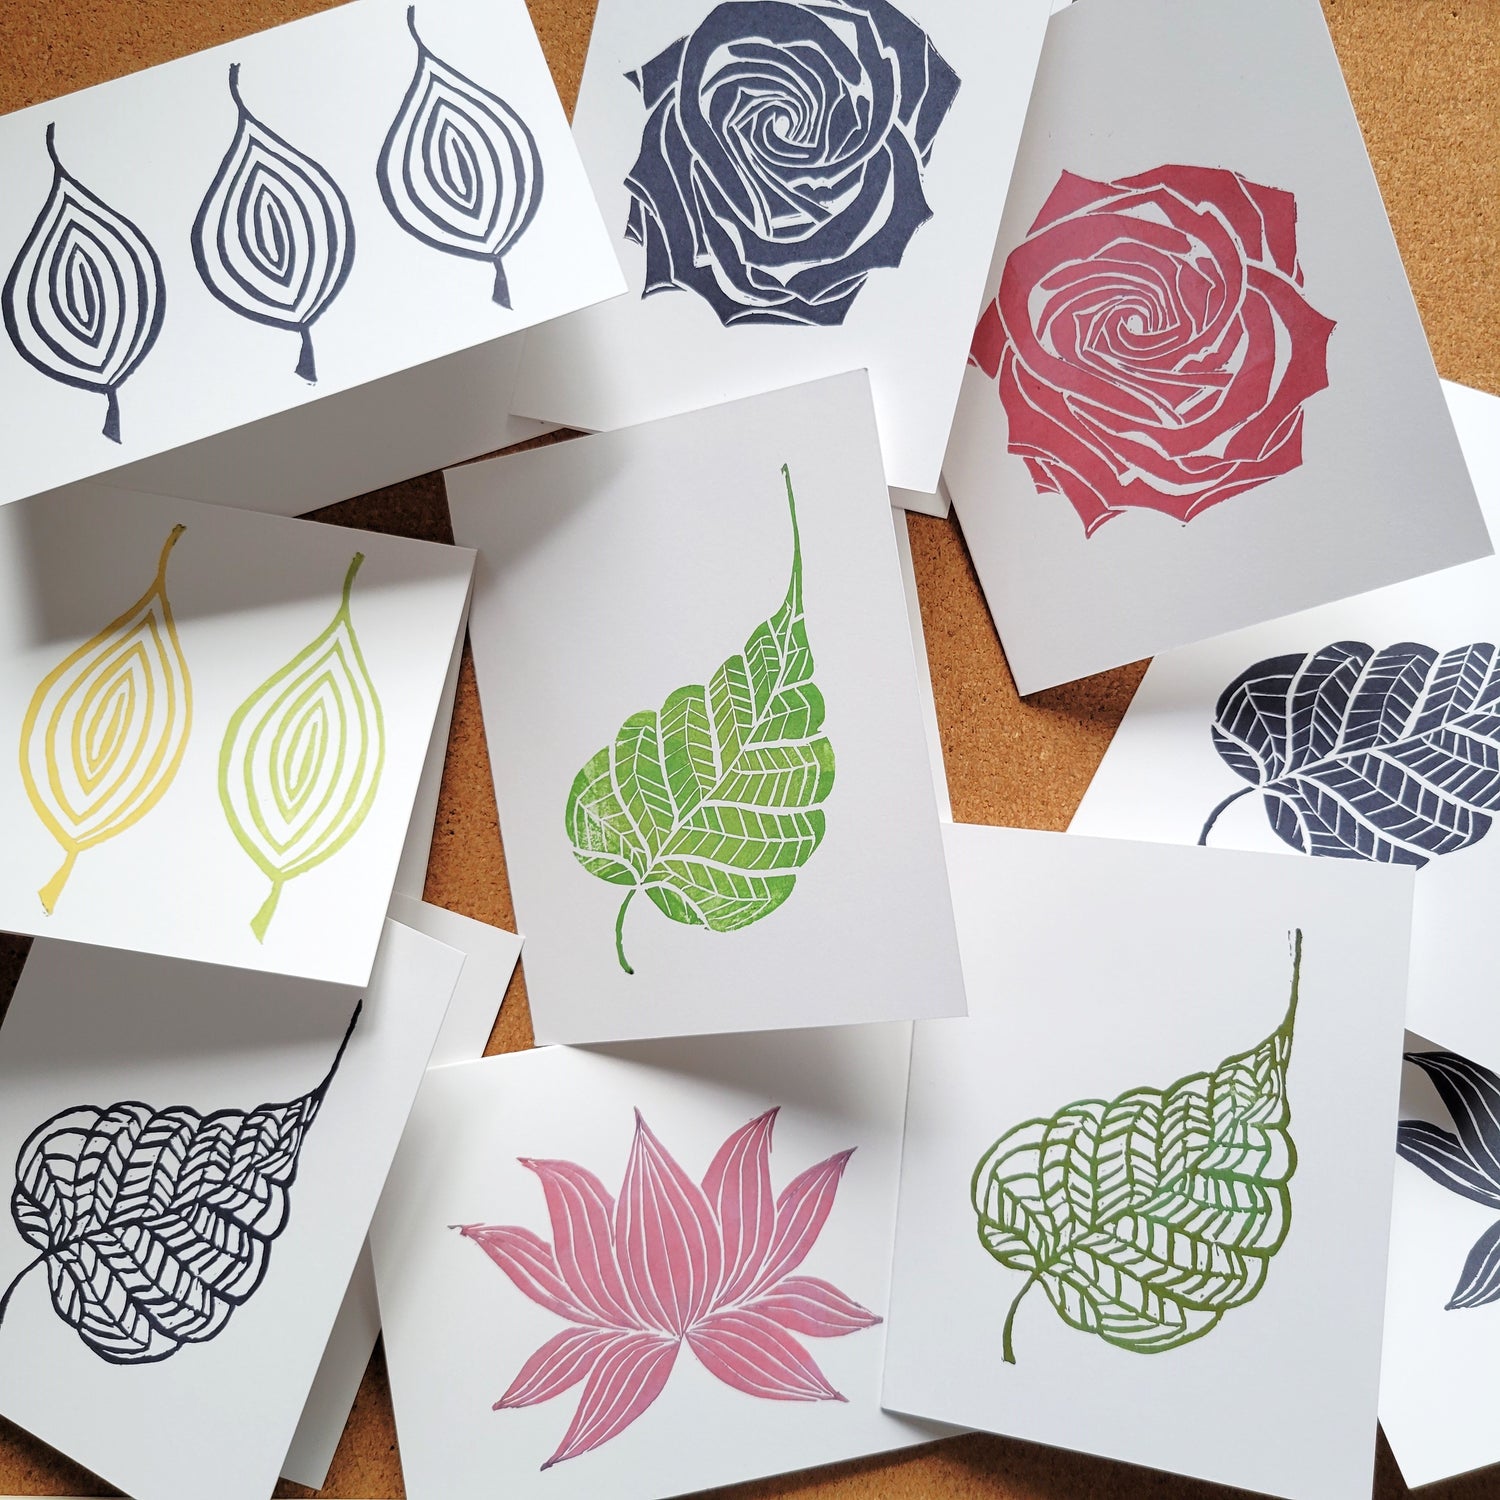 Assortment of botanical print notecards in bright color and black and white versions